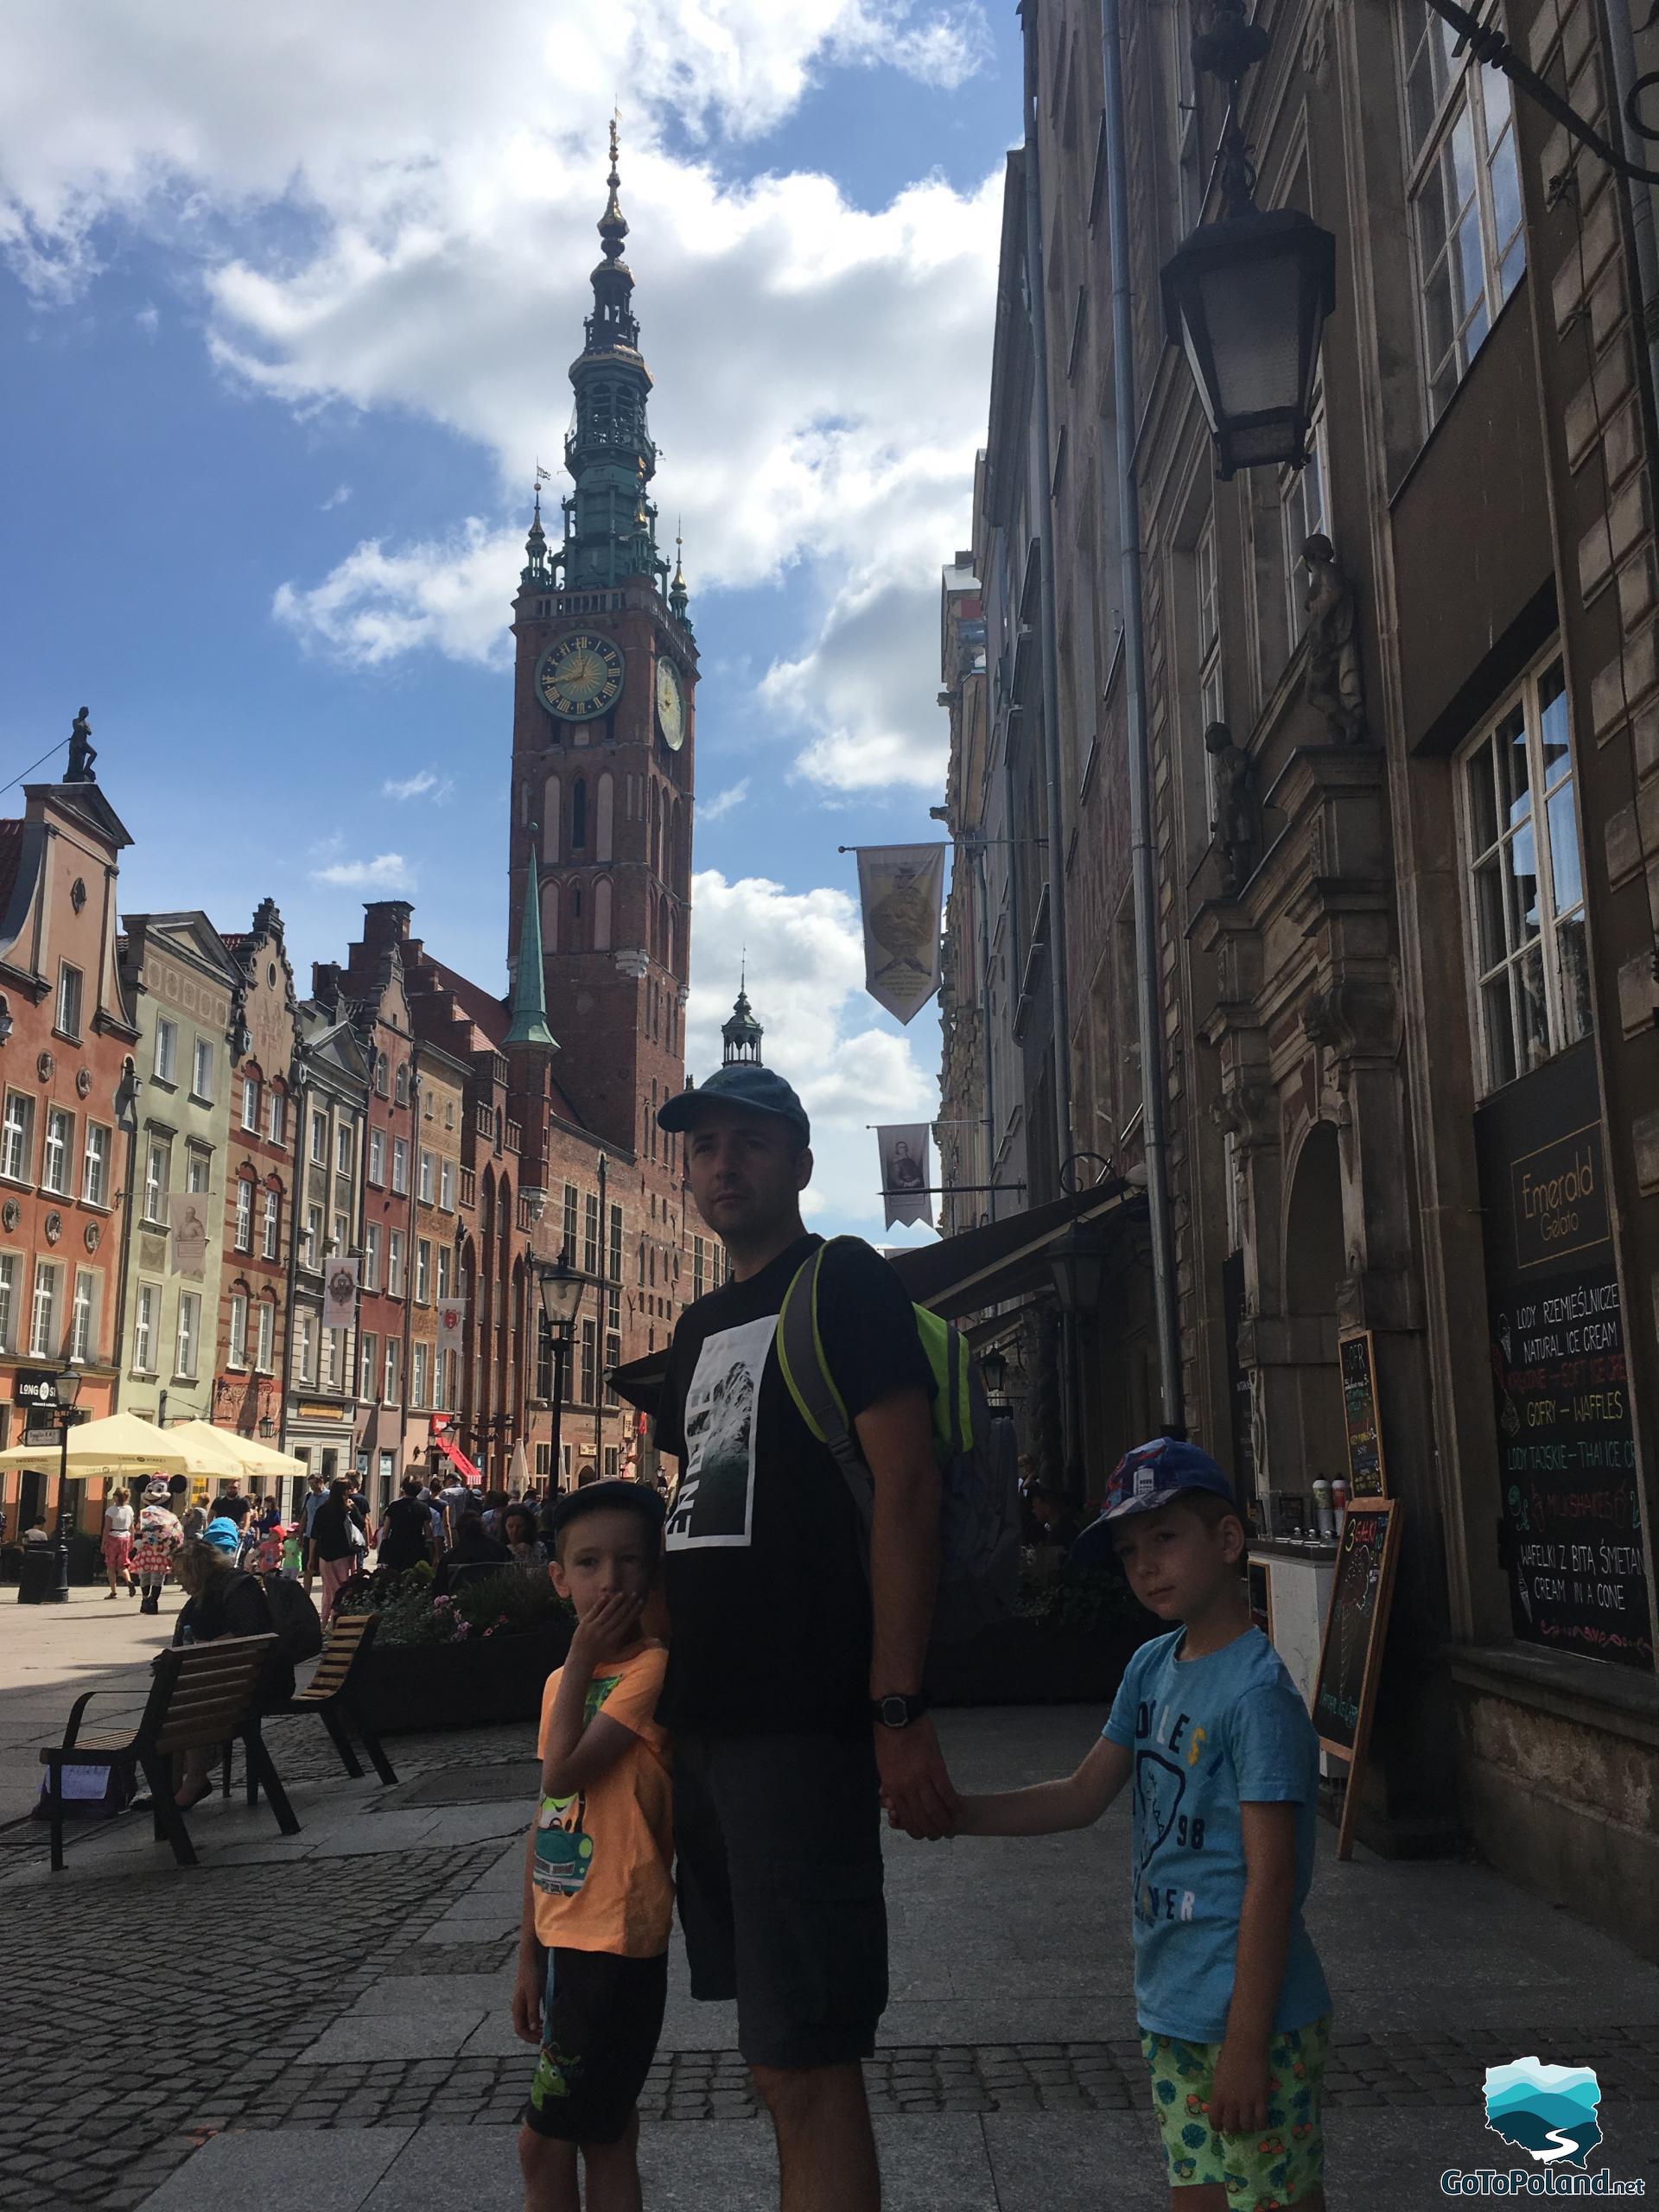 a man with two boys is standing in the street of the market square. In the background there is a historic Town Hall with beautiful, high tower, around them there are tenement houses and lots of tourists 